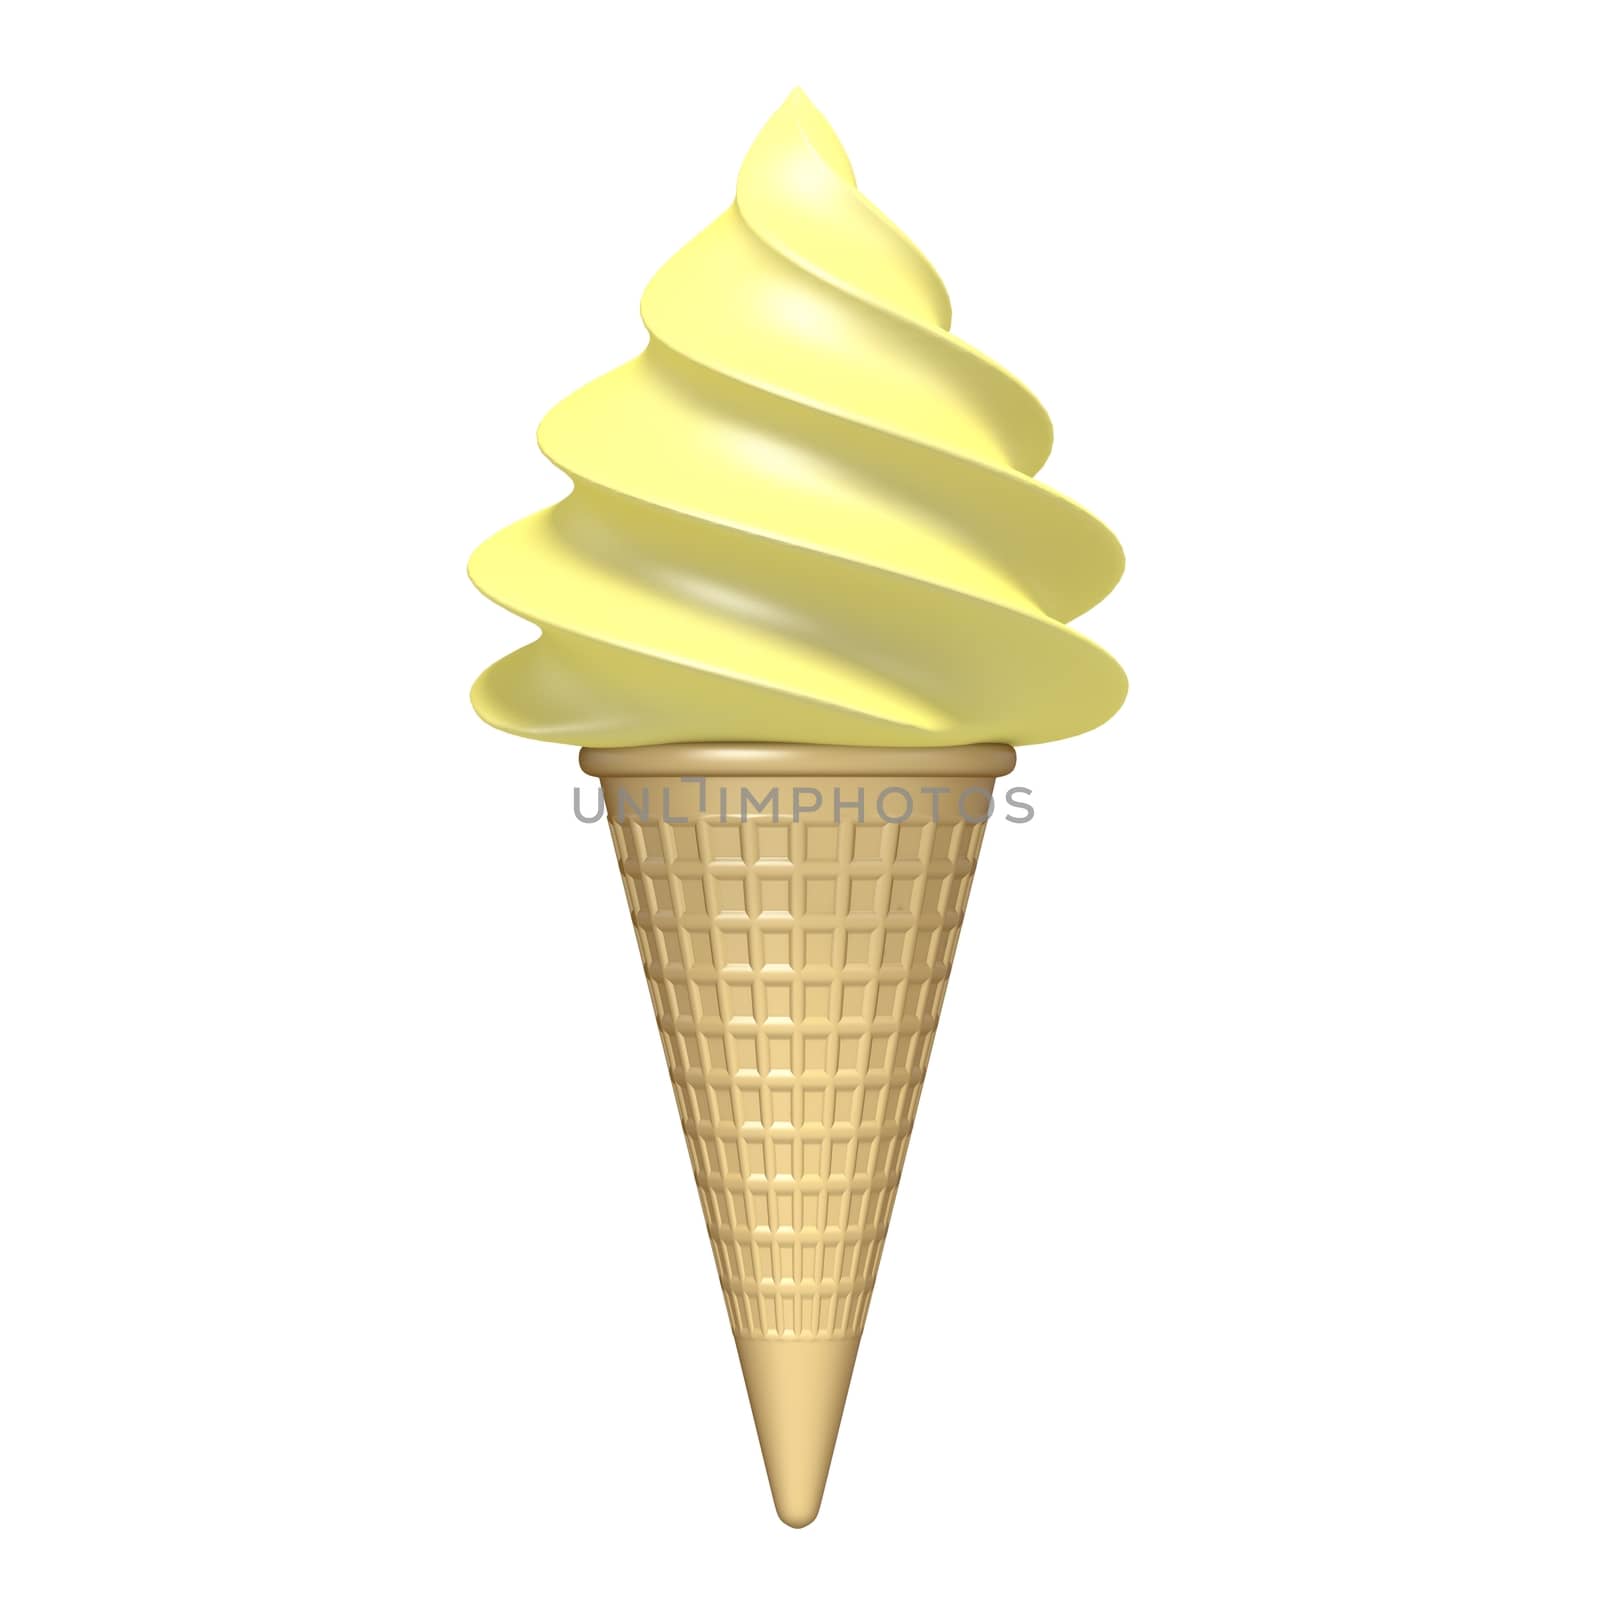 Soft serve yellow ice cream 3D rendering illustration isolated on white background